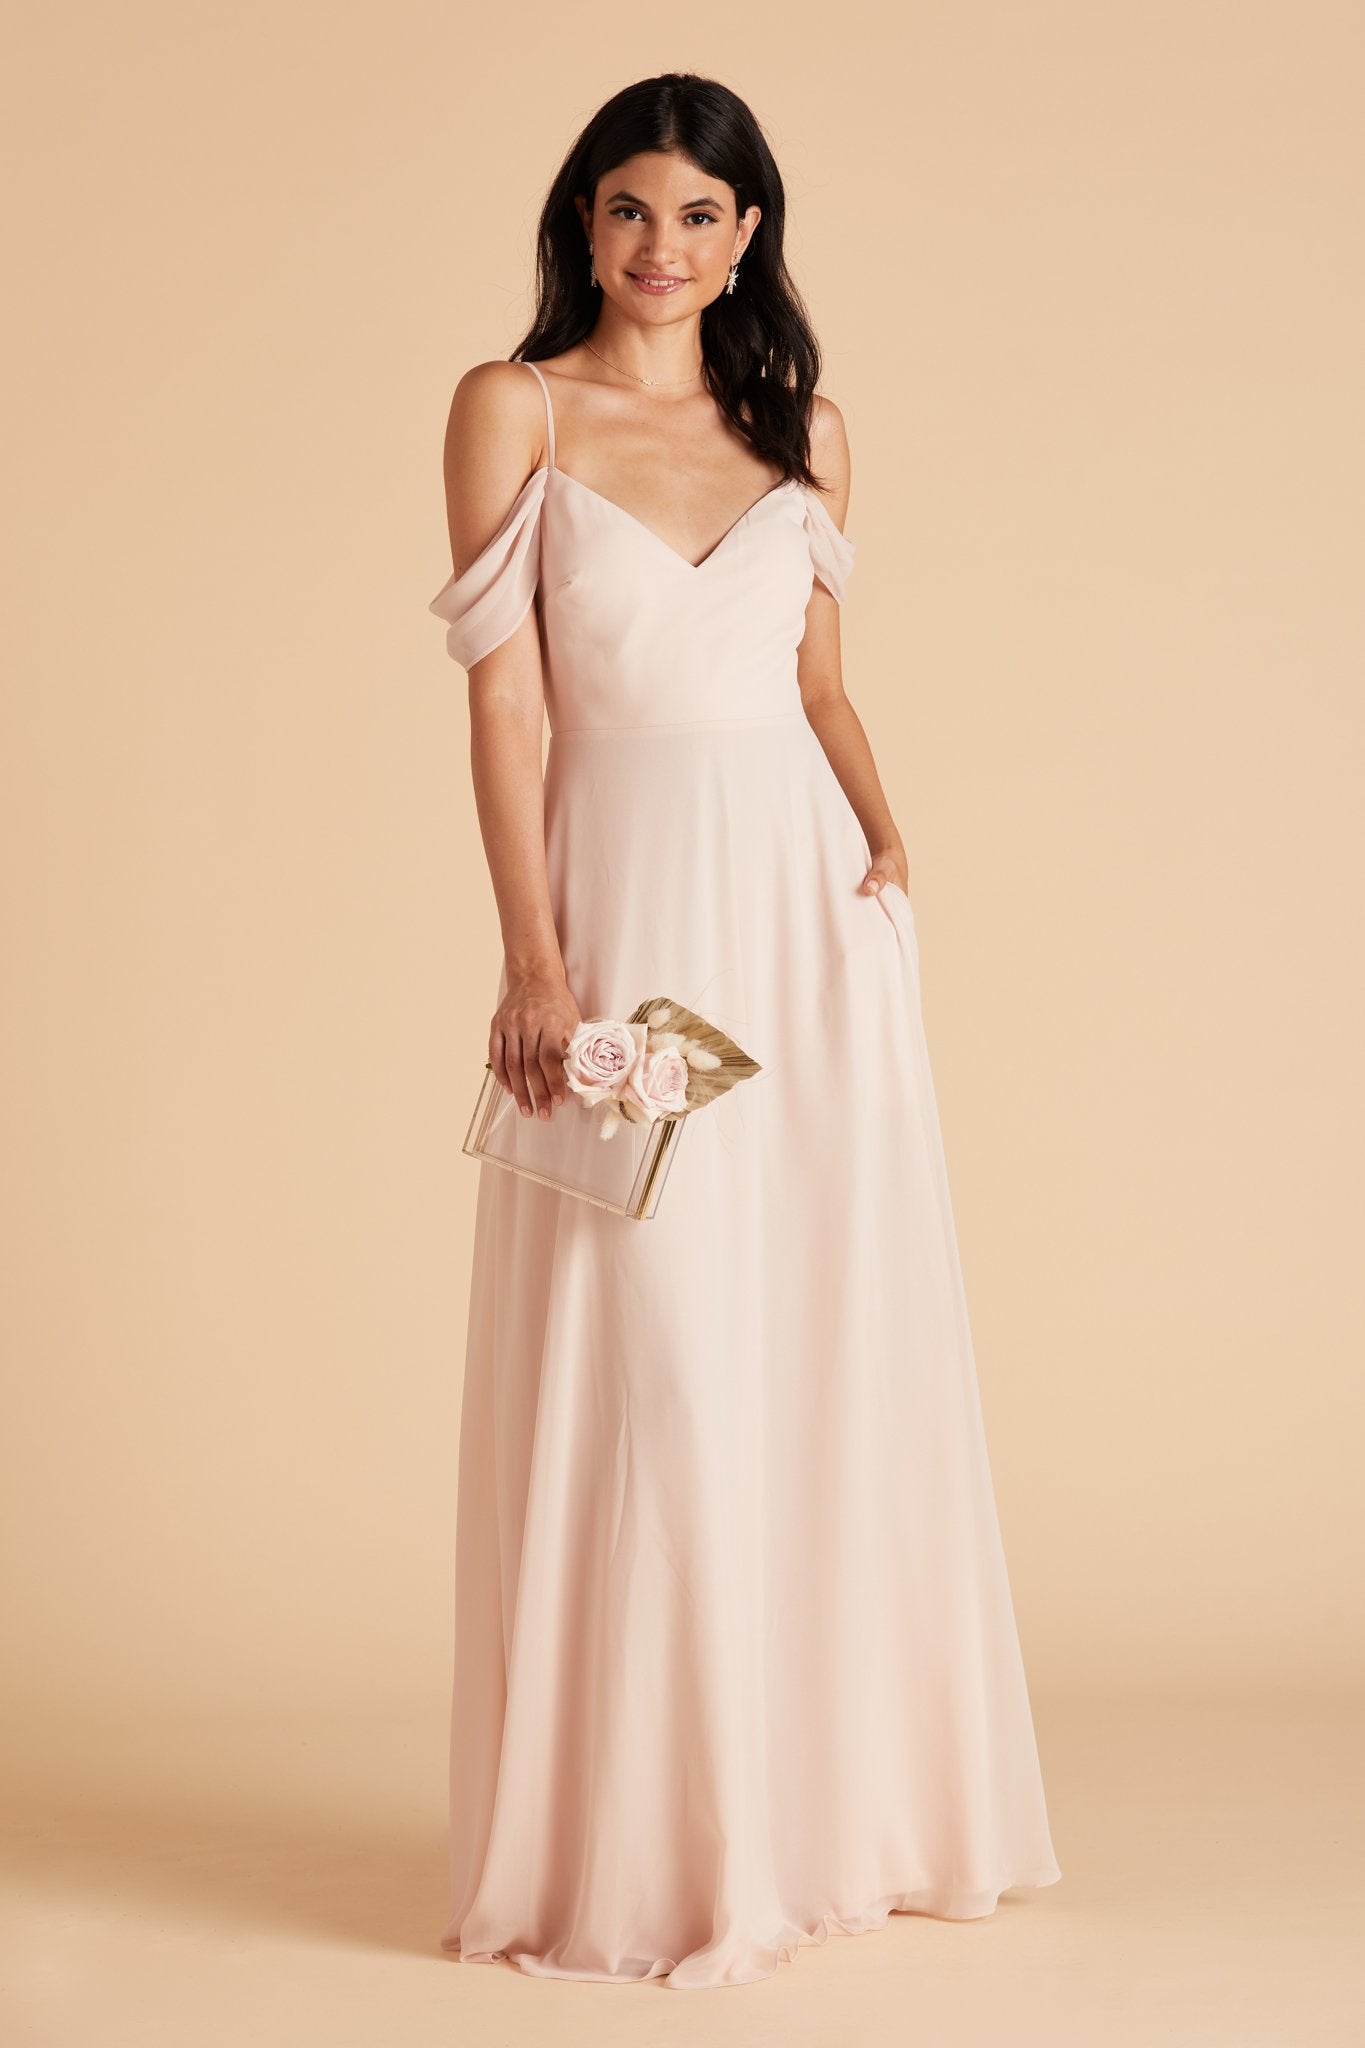 Devin convertible bridesmaids dress in pale blush chiffon by Birdy Grey, front view with hand in pocket